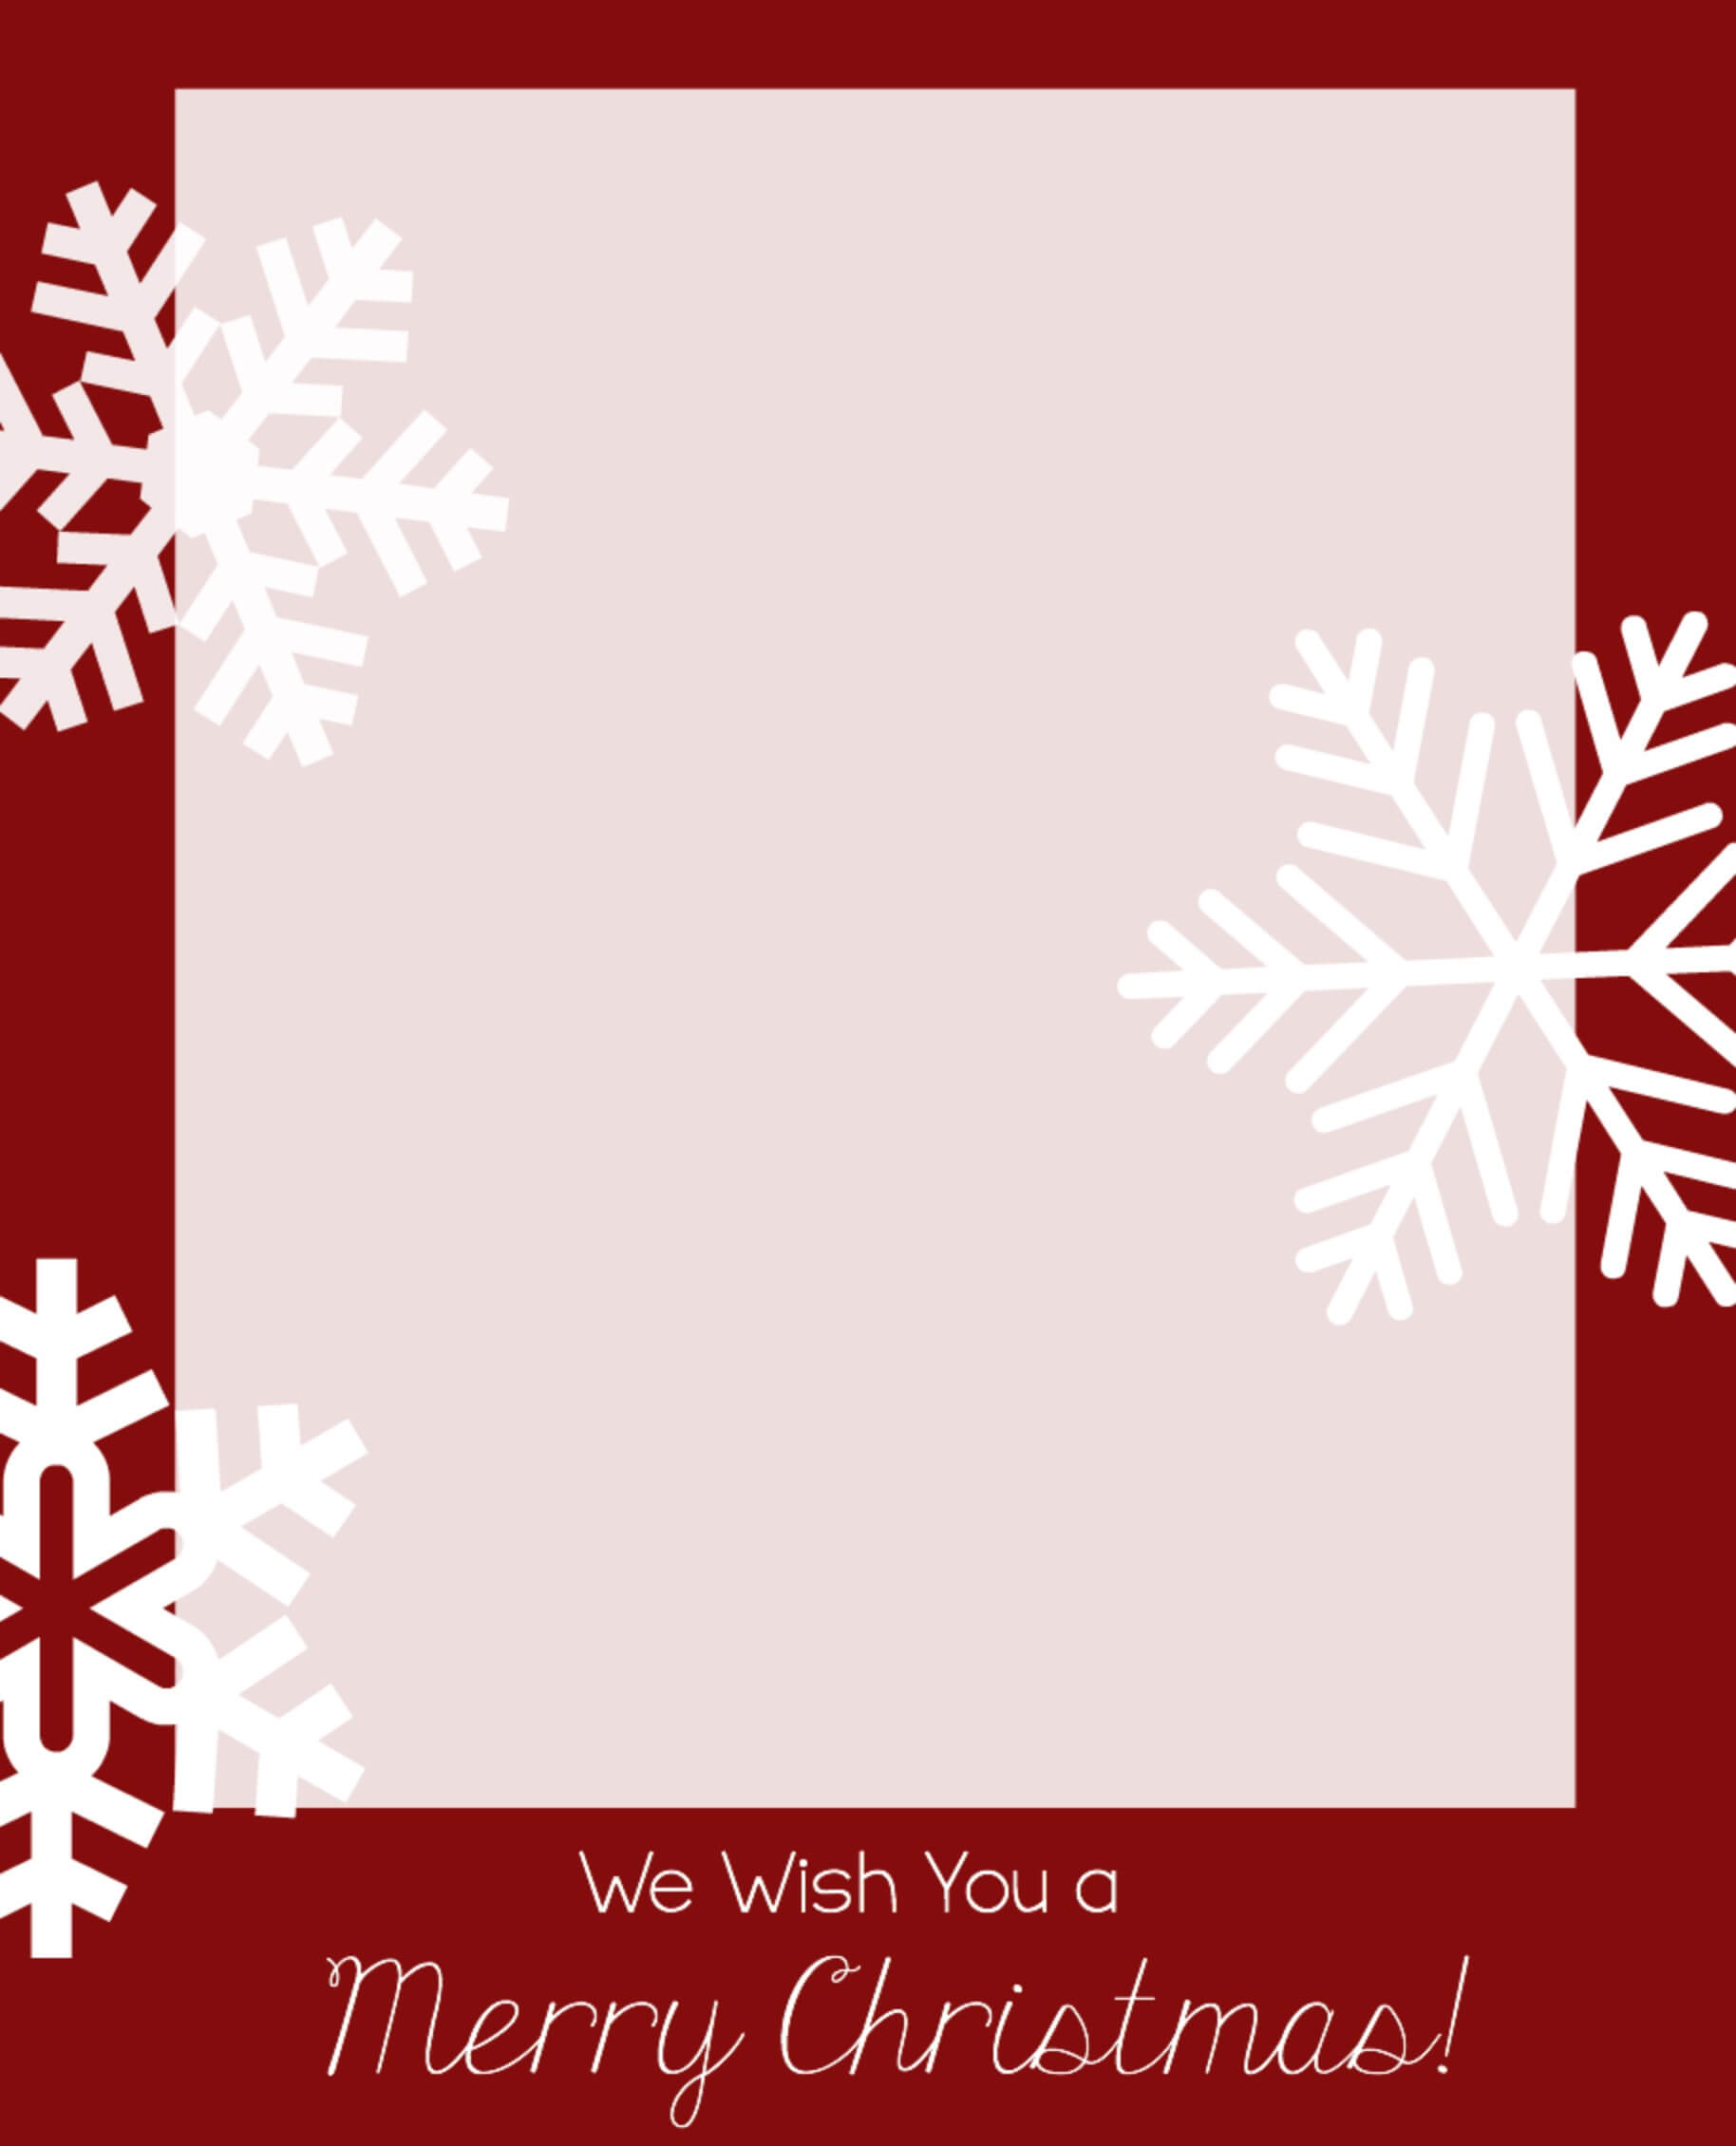 Christmas Cards Free Templates - Calep.midnightpig.co Intended For Christmas Photo Cards Templates Free Downloads